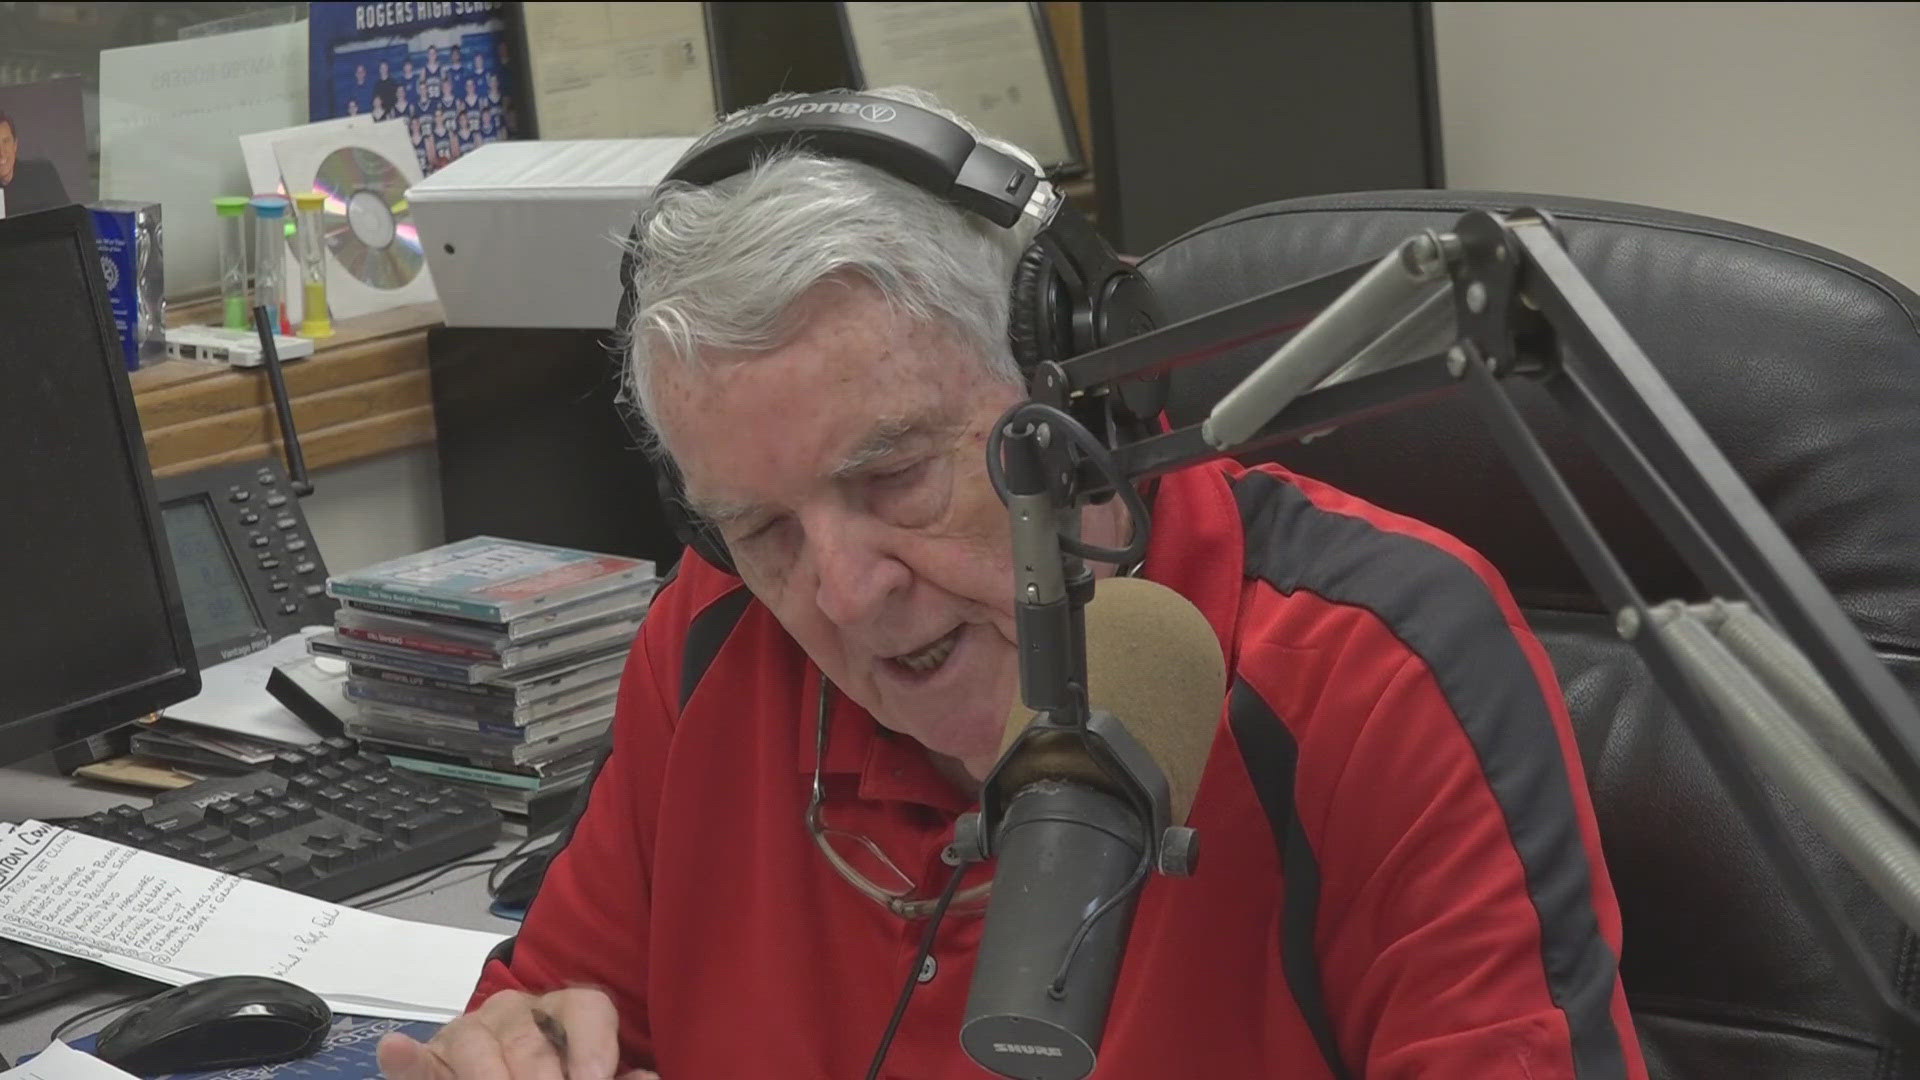 Kermit Womack, owner of KURM Radio, has been talking to people on the radio for 72 years.